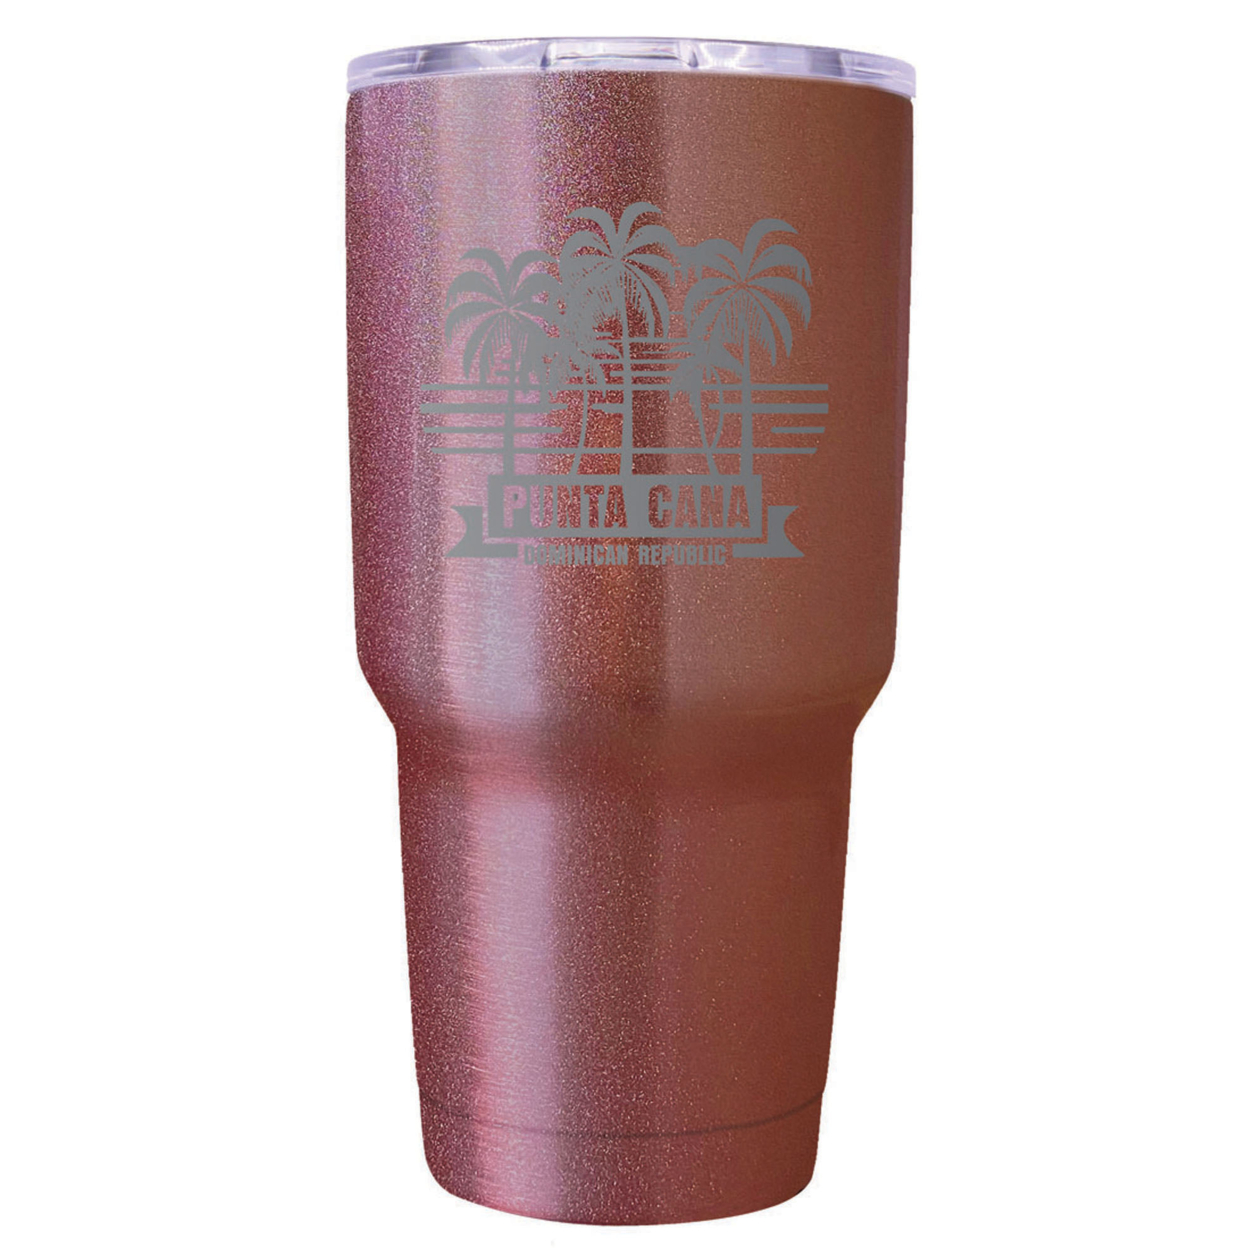 Punta Cana Dominican Republic Souvenir 24 Oz Insulated Stainless Steel Tumbler Etched - Rose Gold, PALM BEACH